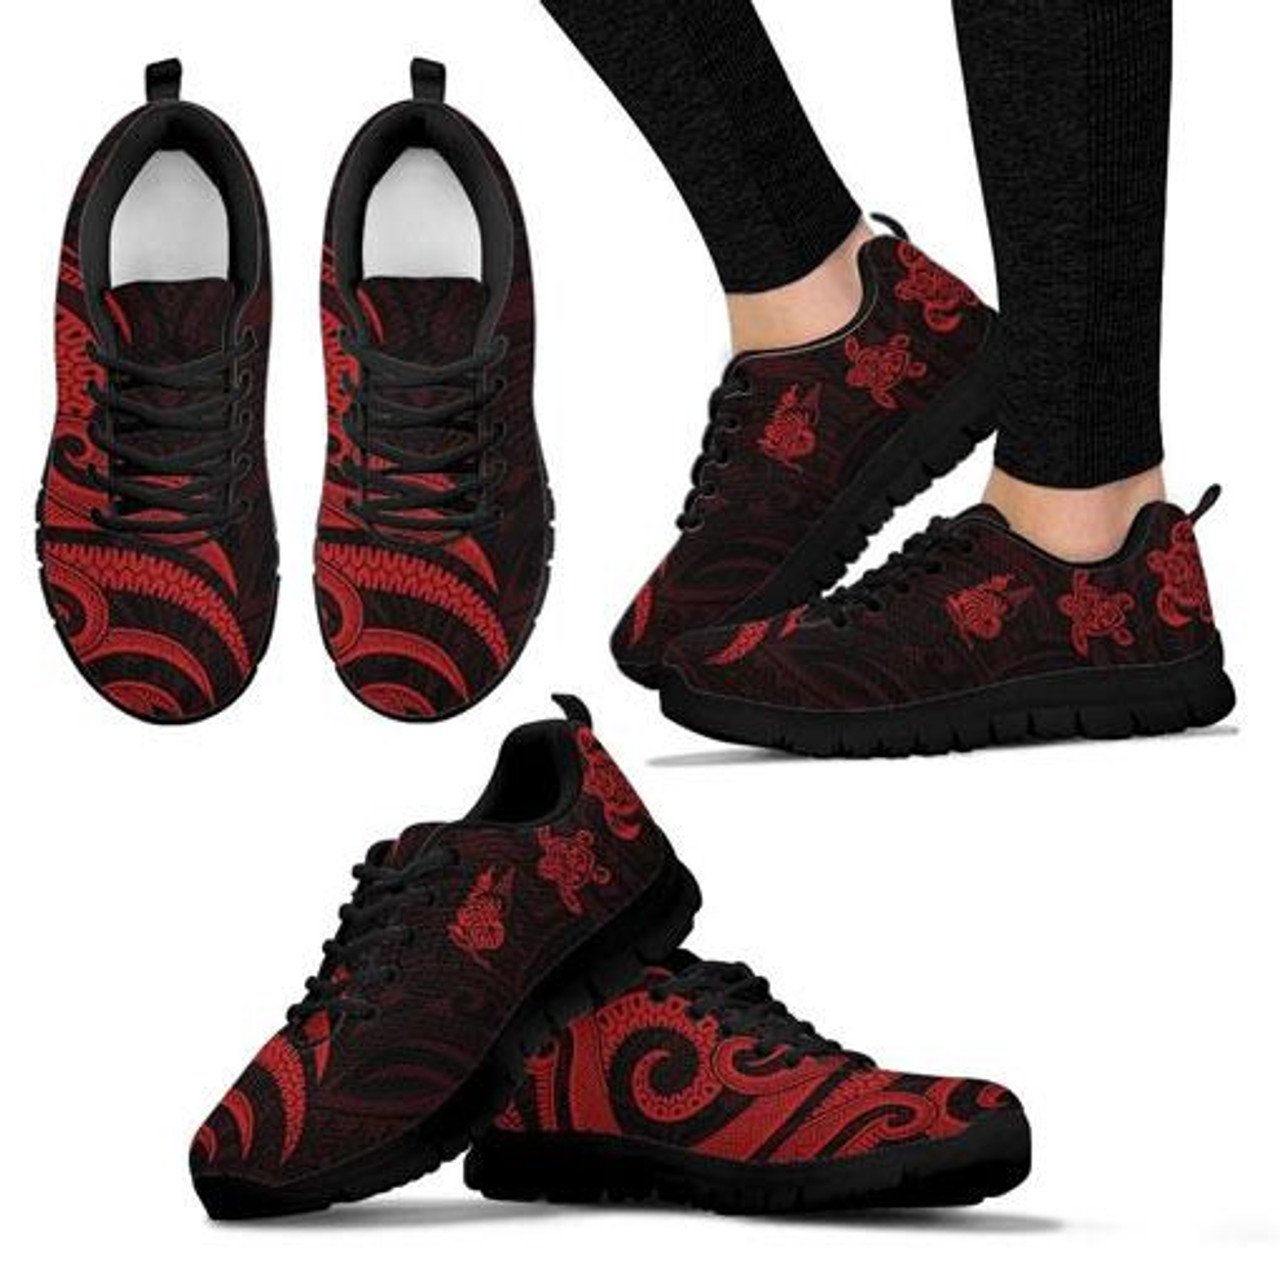 New Caledonia Sneakers - Red Tentacle Turtle 4